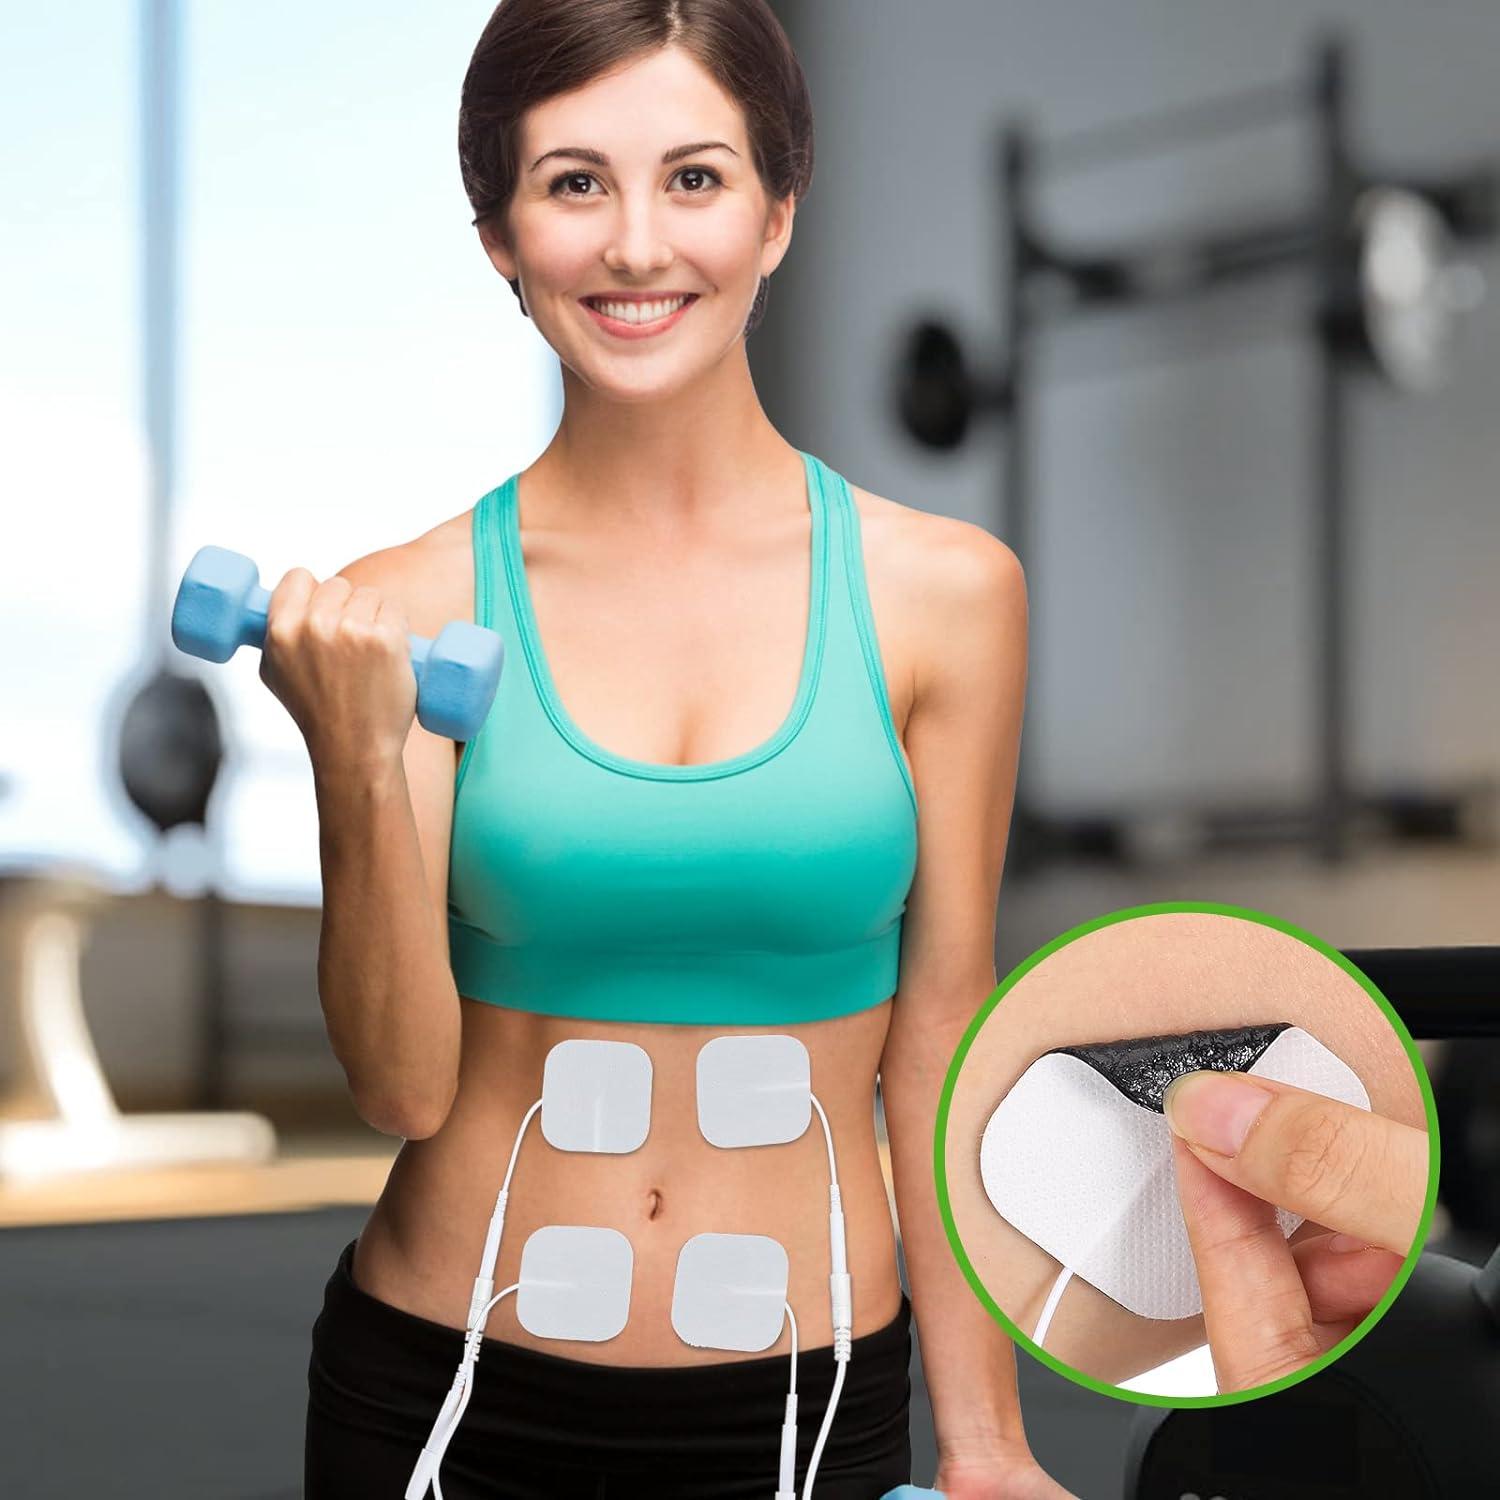 Dropship 12pcs Reusable Self-Adhesive Electrode Pads - For Muscle